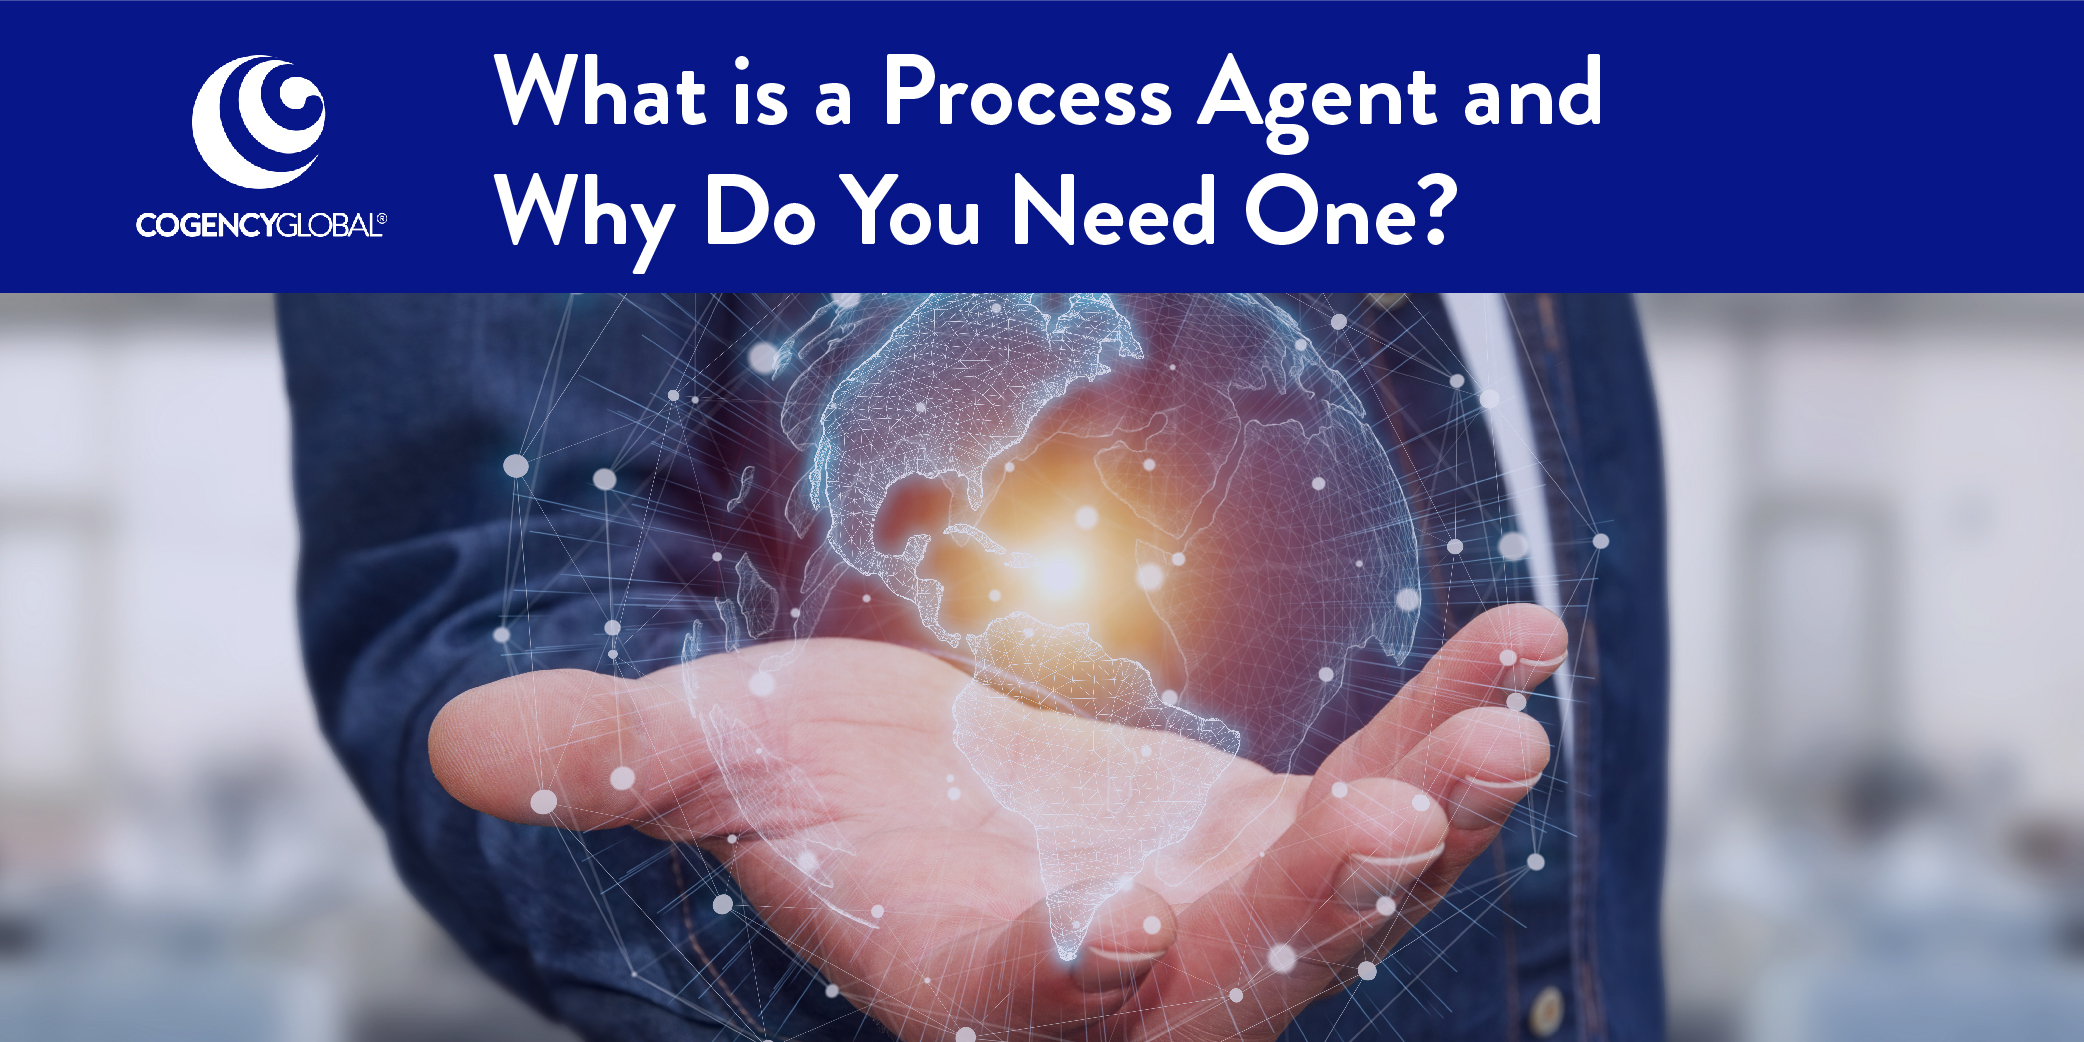 What is a Process Agent and Why Do You Need One?